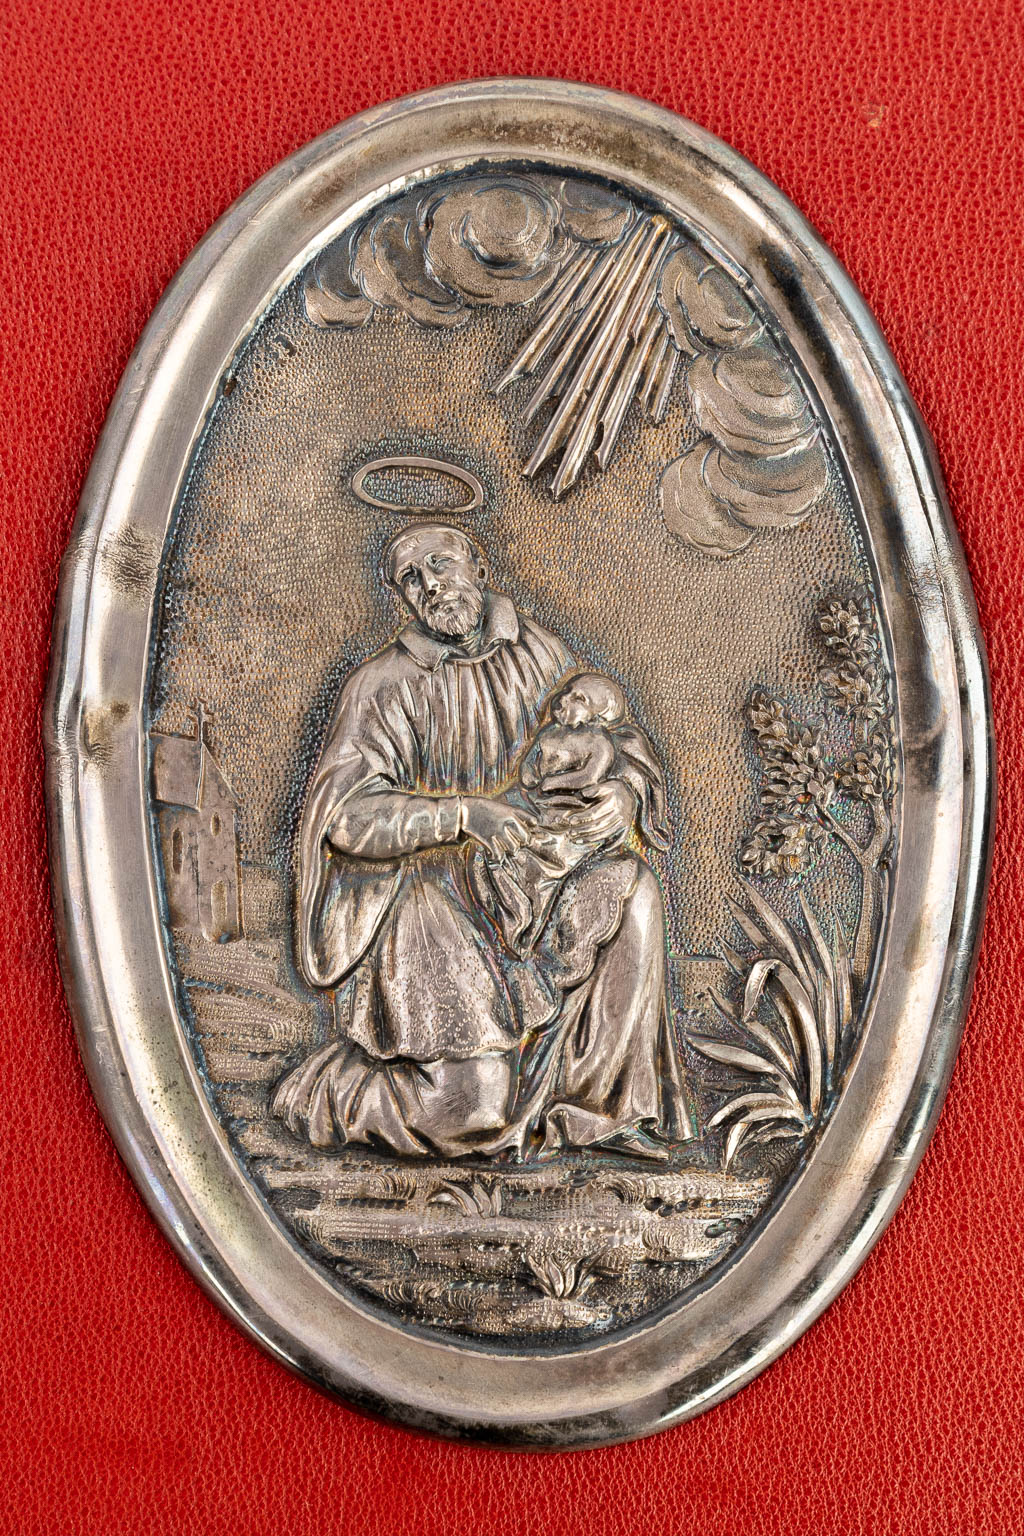 A Missale Romanum finished with silver-plated plaques of Madonna and Christ. "Edito Juxta Tipicam Vaticanam". (H:34cm)